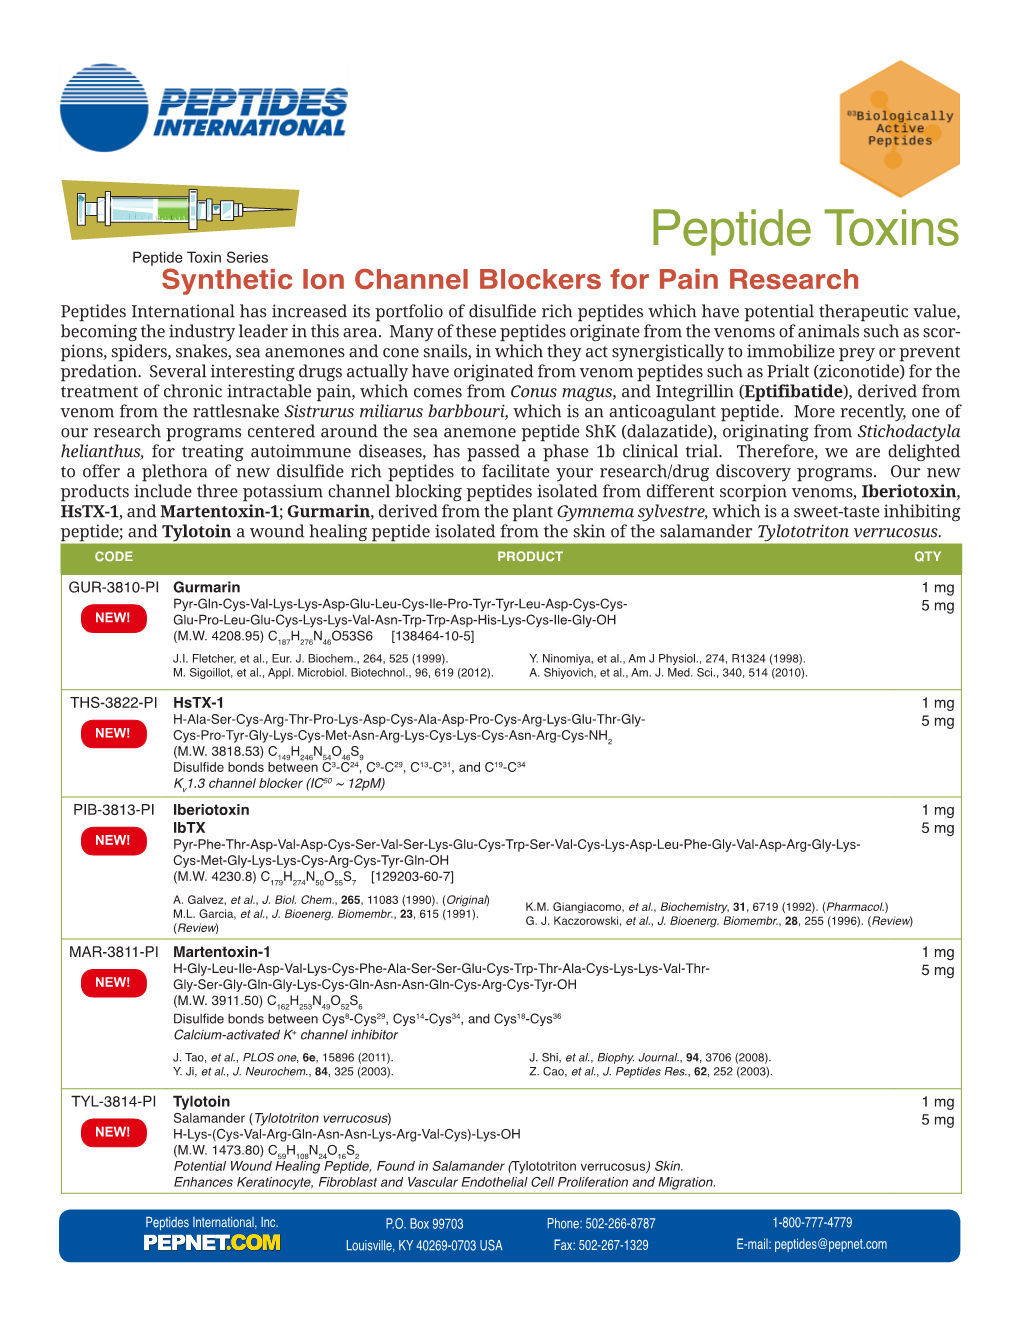 Peptide Toxins Quick Reference